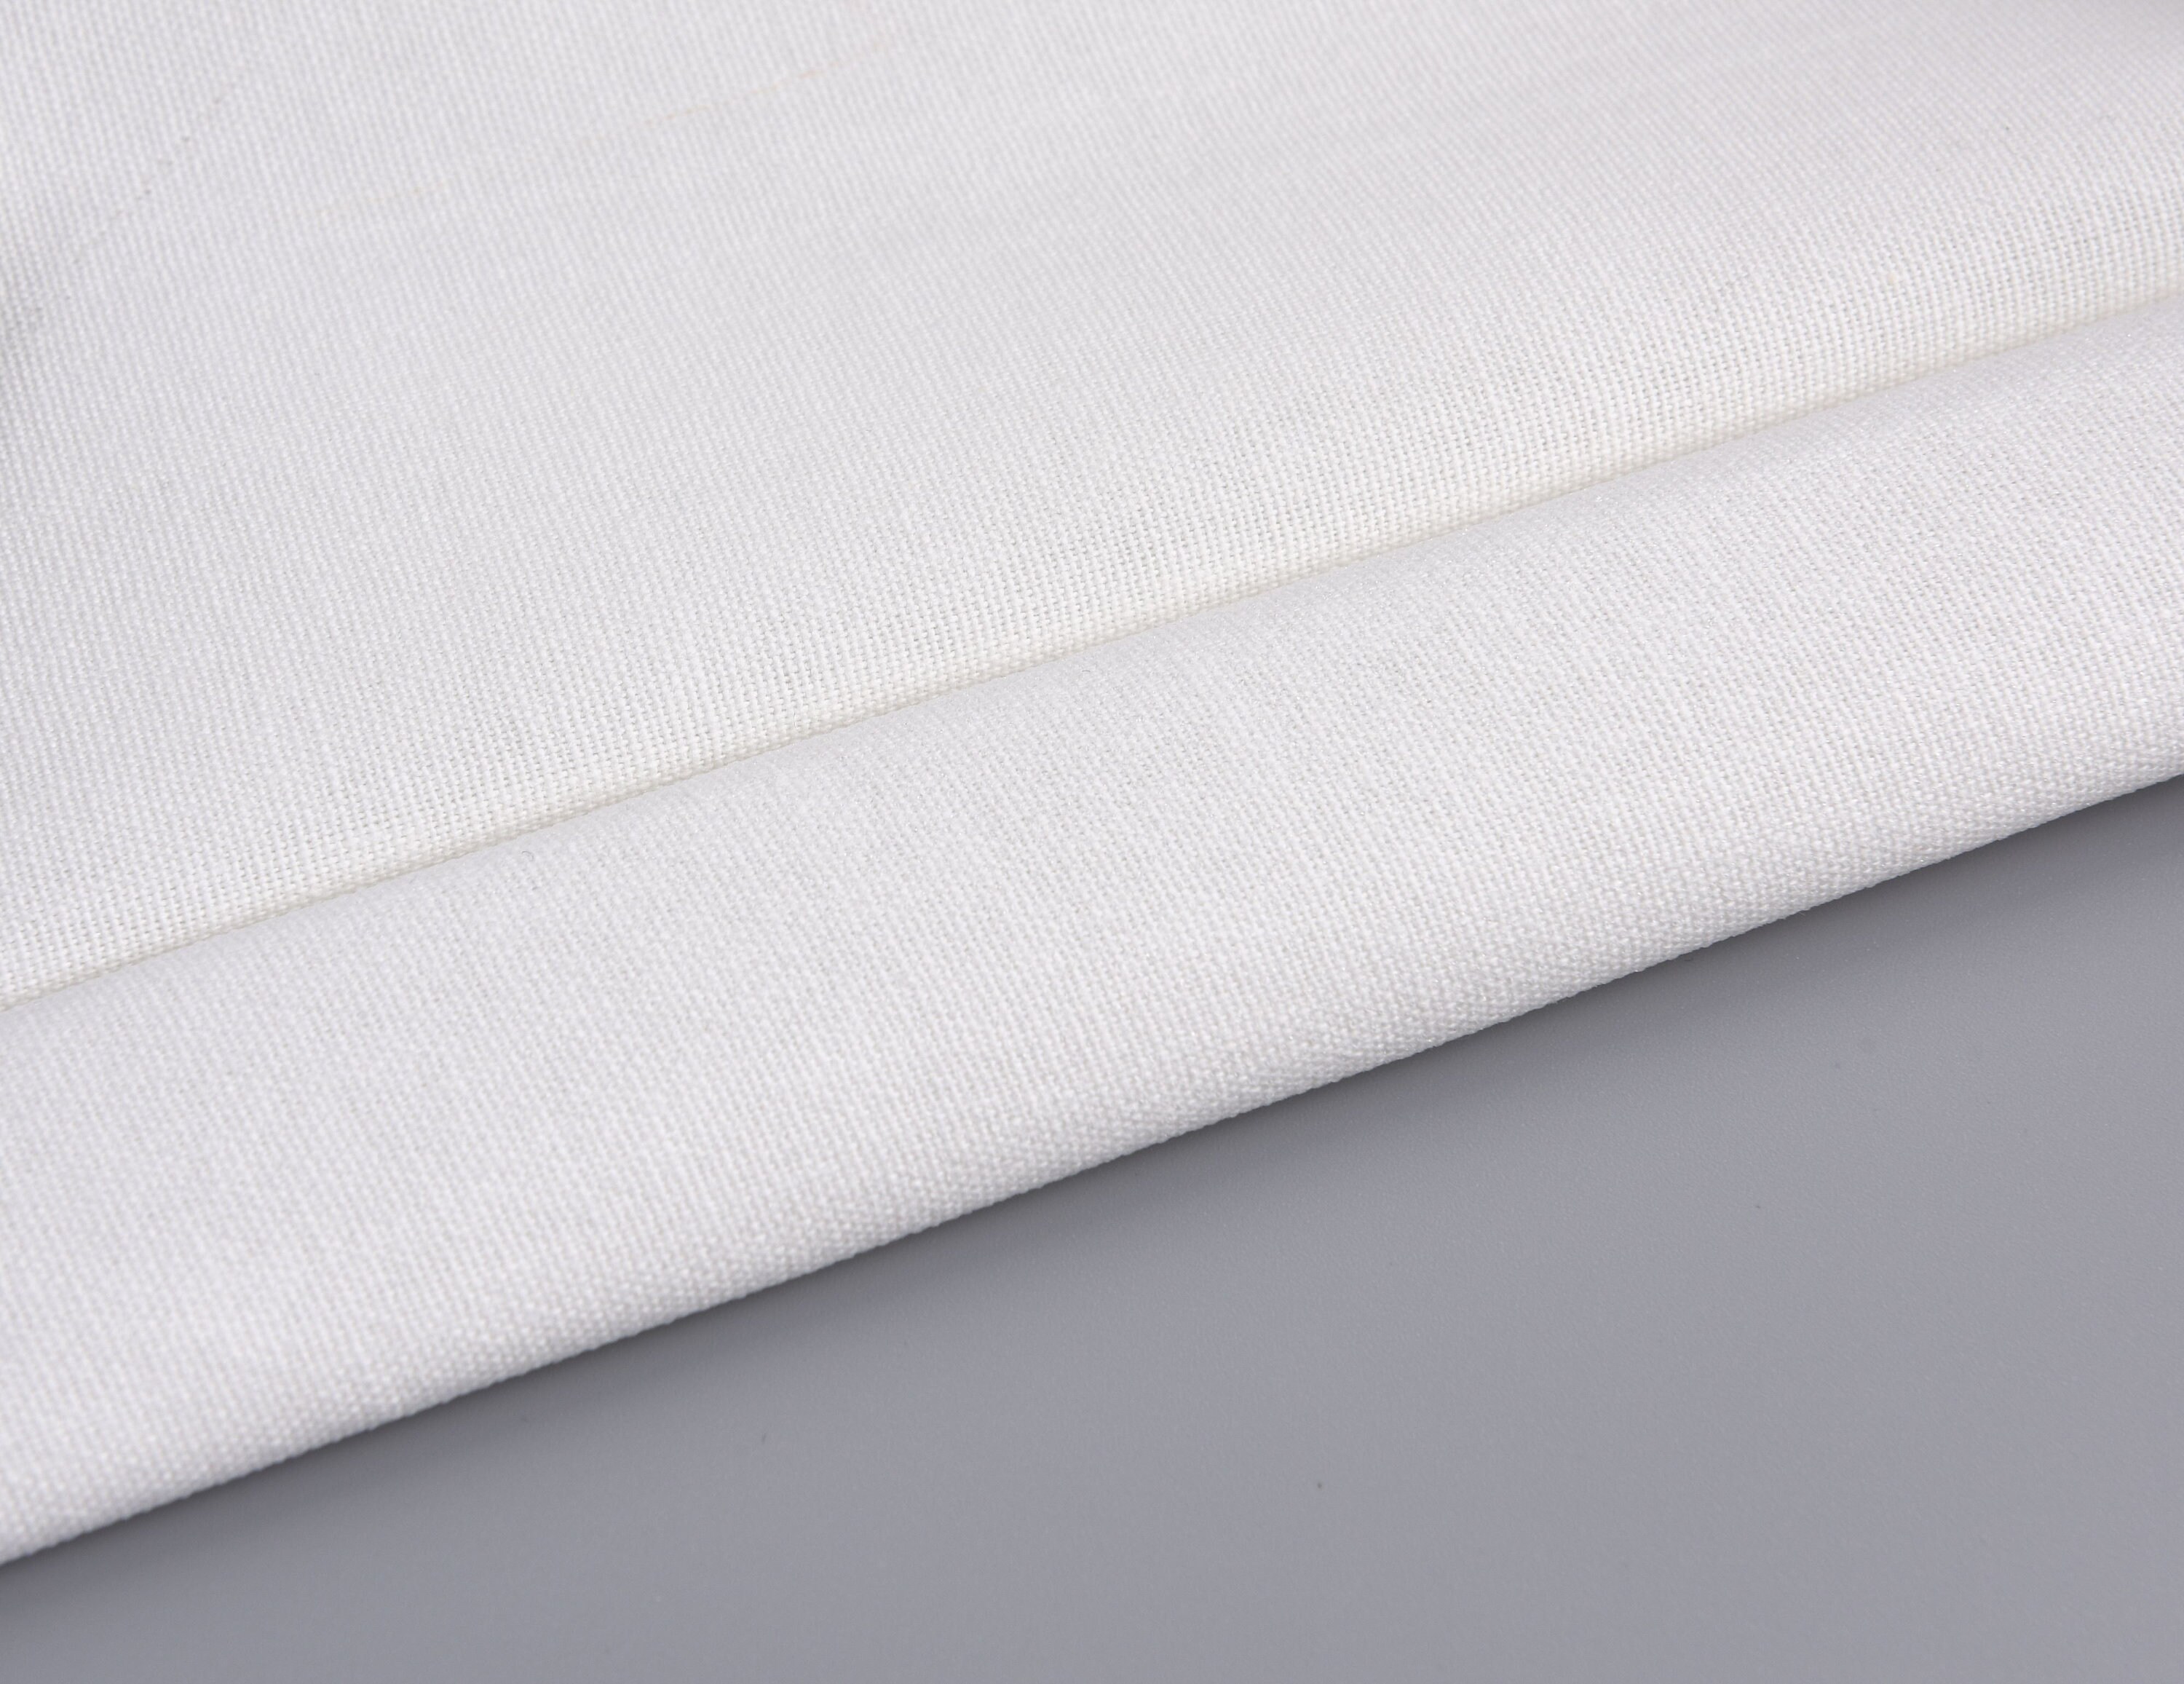 Iron on Fusible Off-white Cotton Interfacing Fabric 